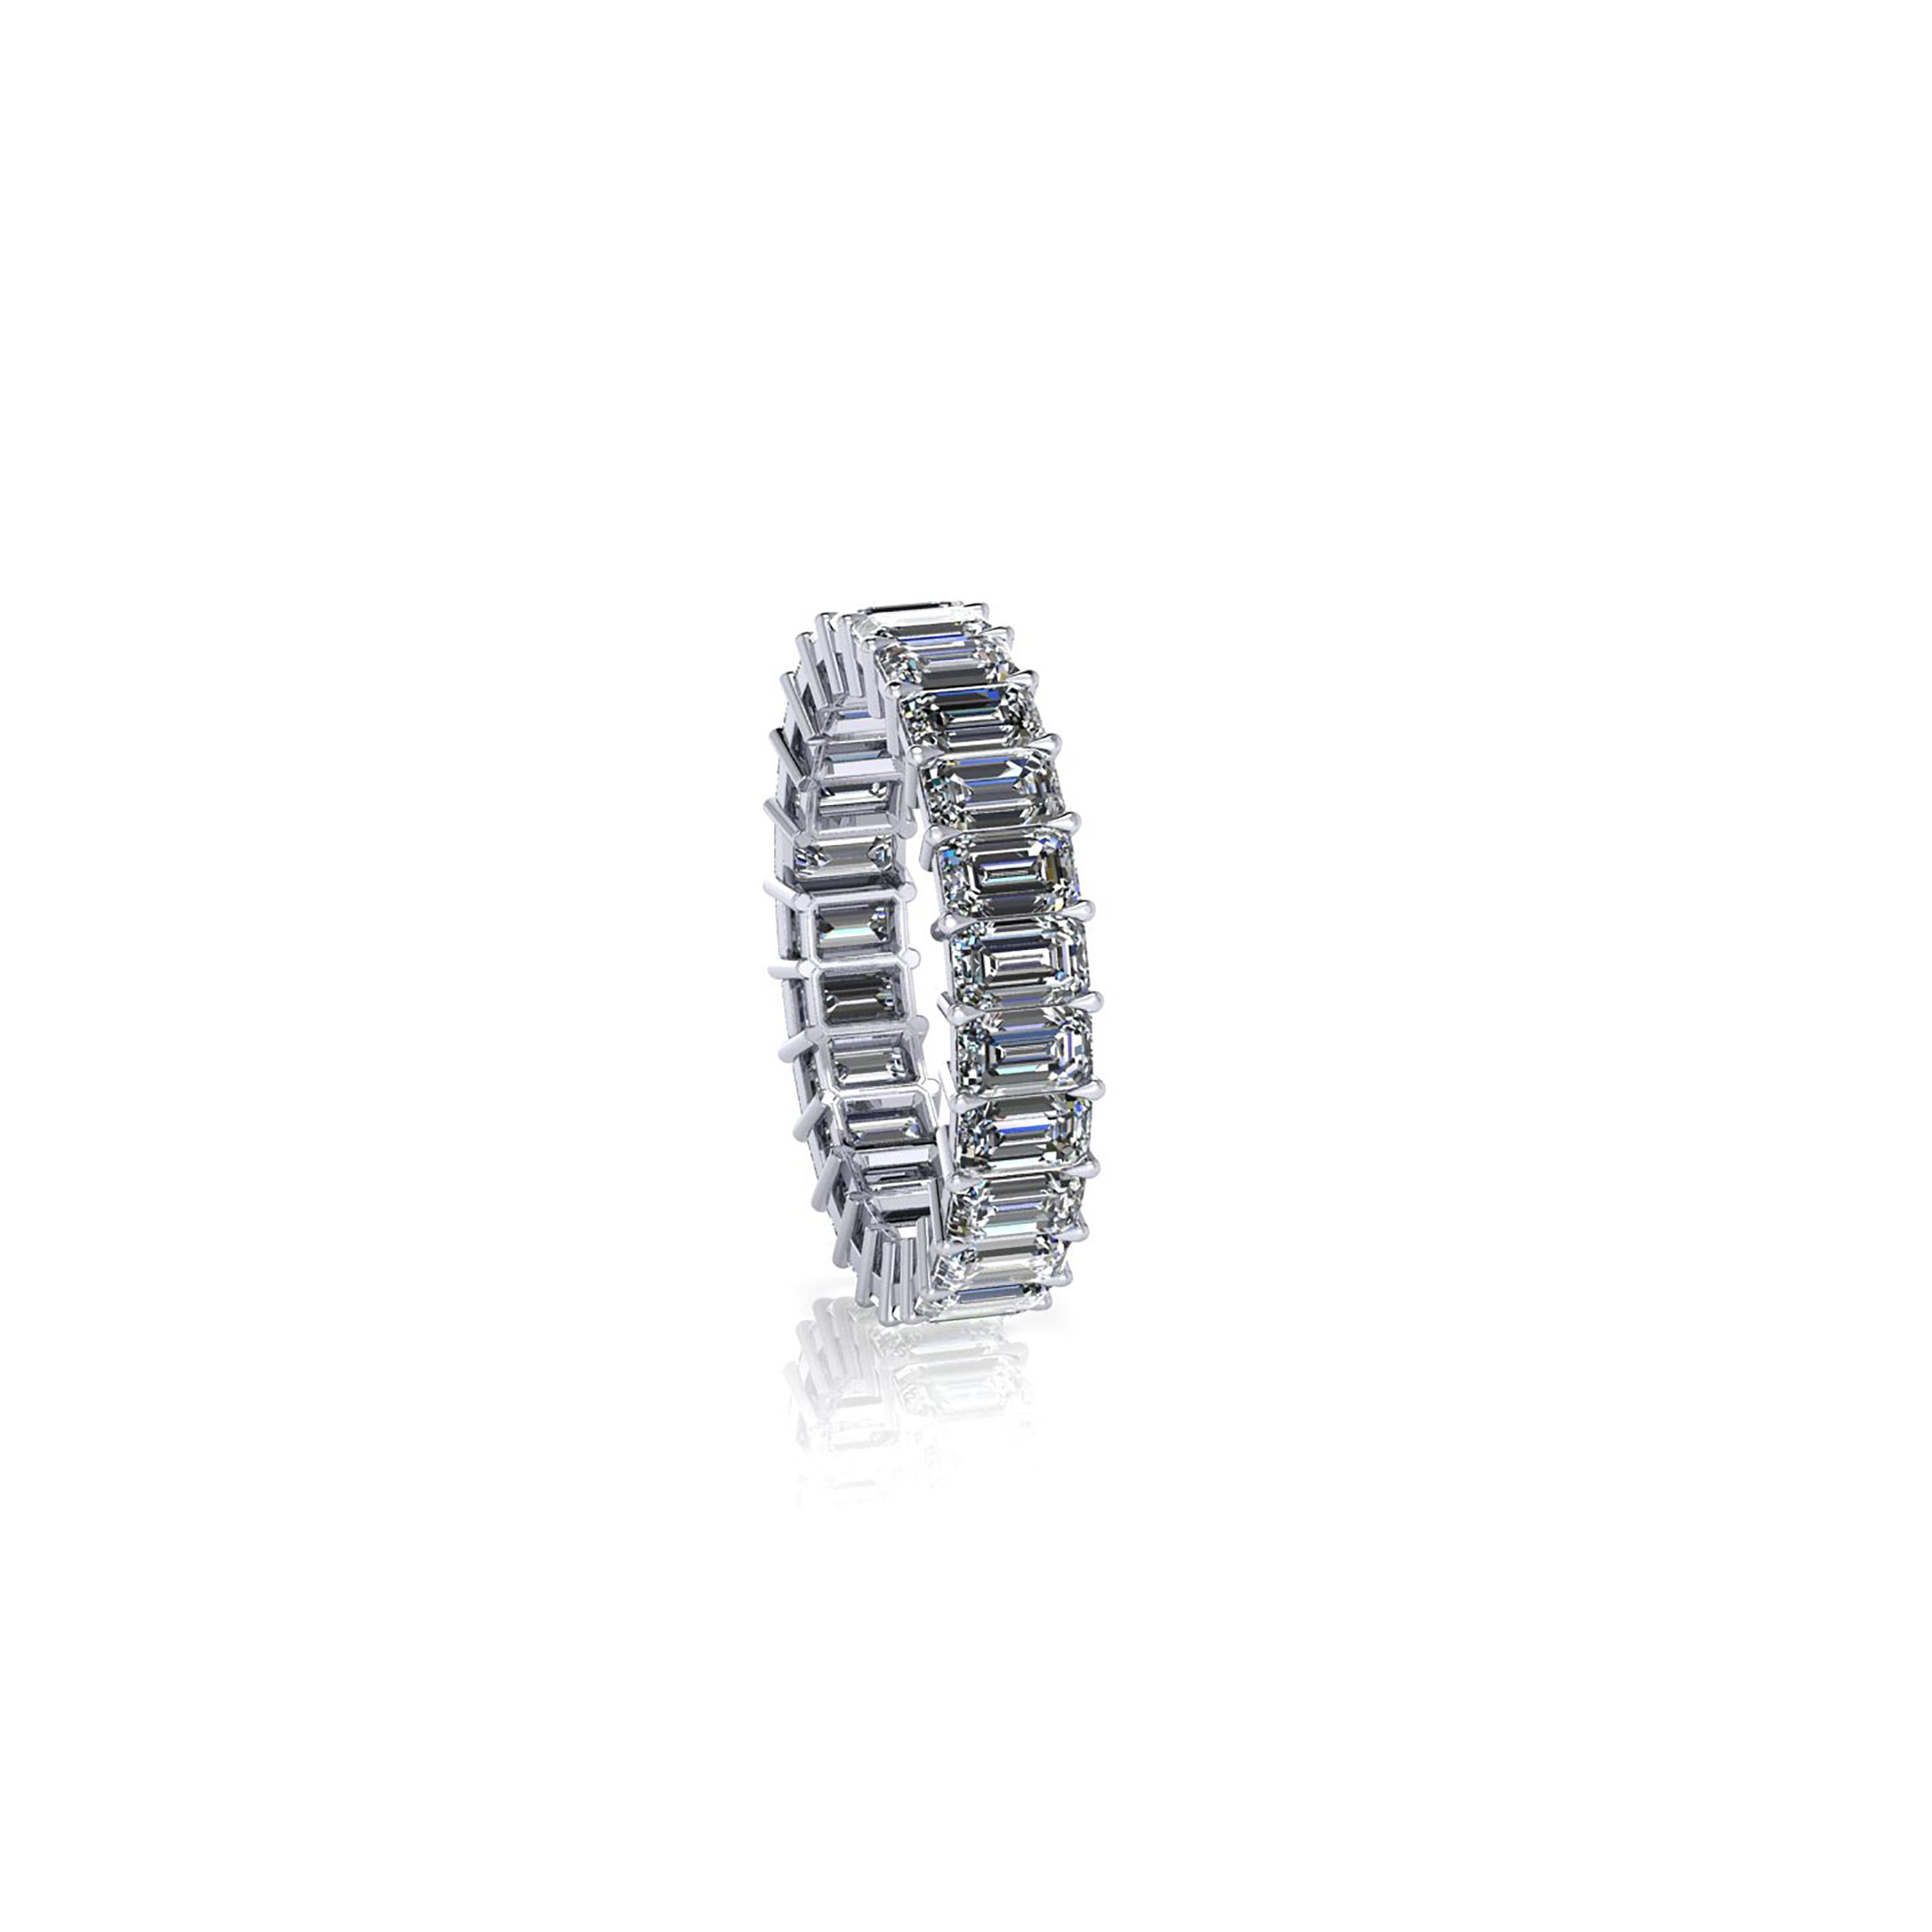 4.00 carats of bright white diamonds G color, VS clarity, set to perfection in a hand crafted, Platinum 950 eternity band, made in New York with the best Italian craftsmanship, size 6, complimentary sizing upon order, inquire for custom orders. 

